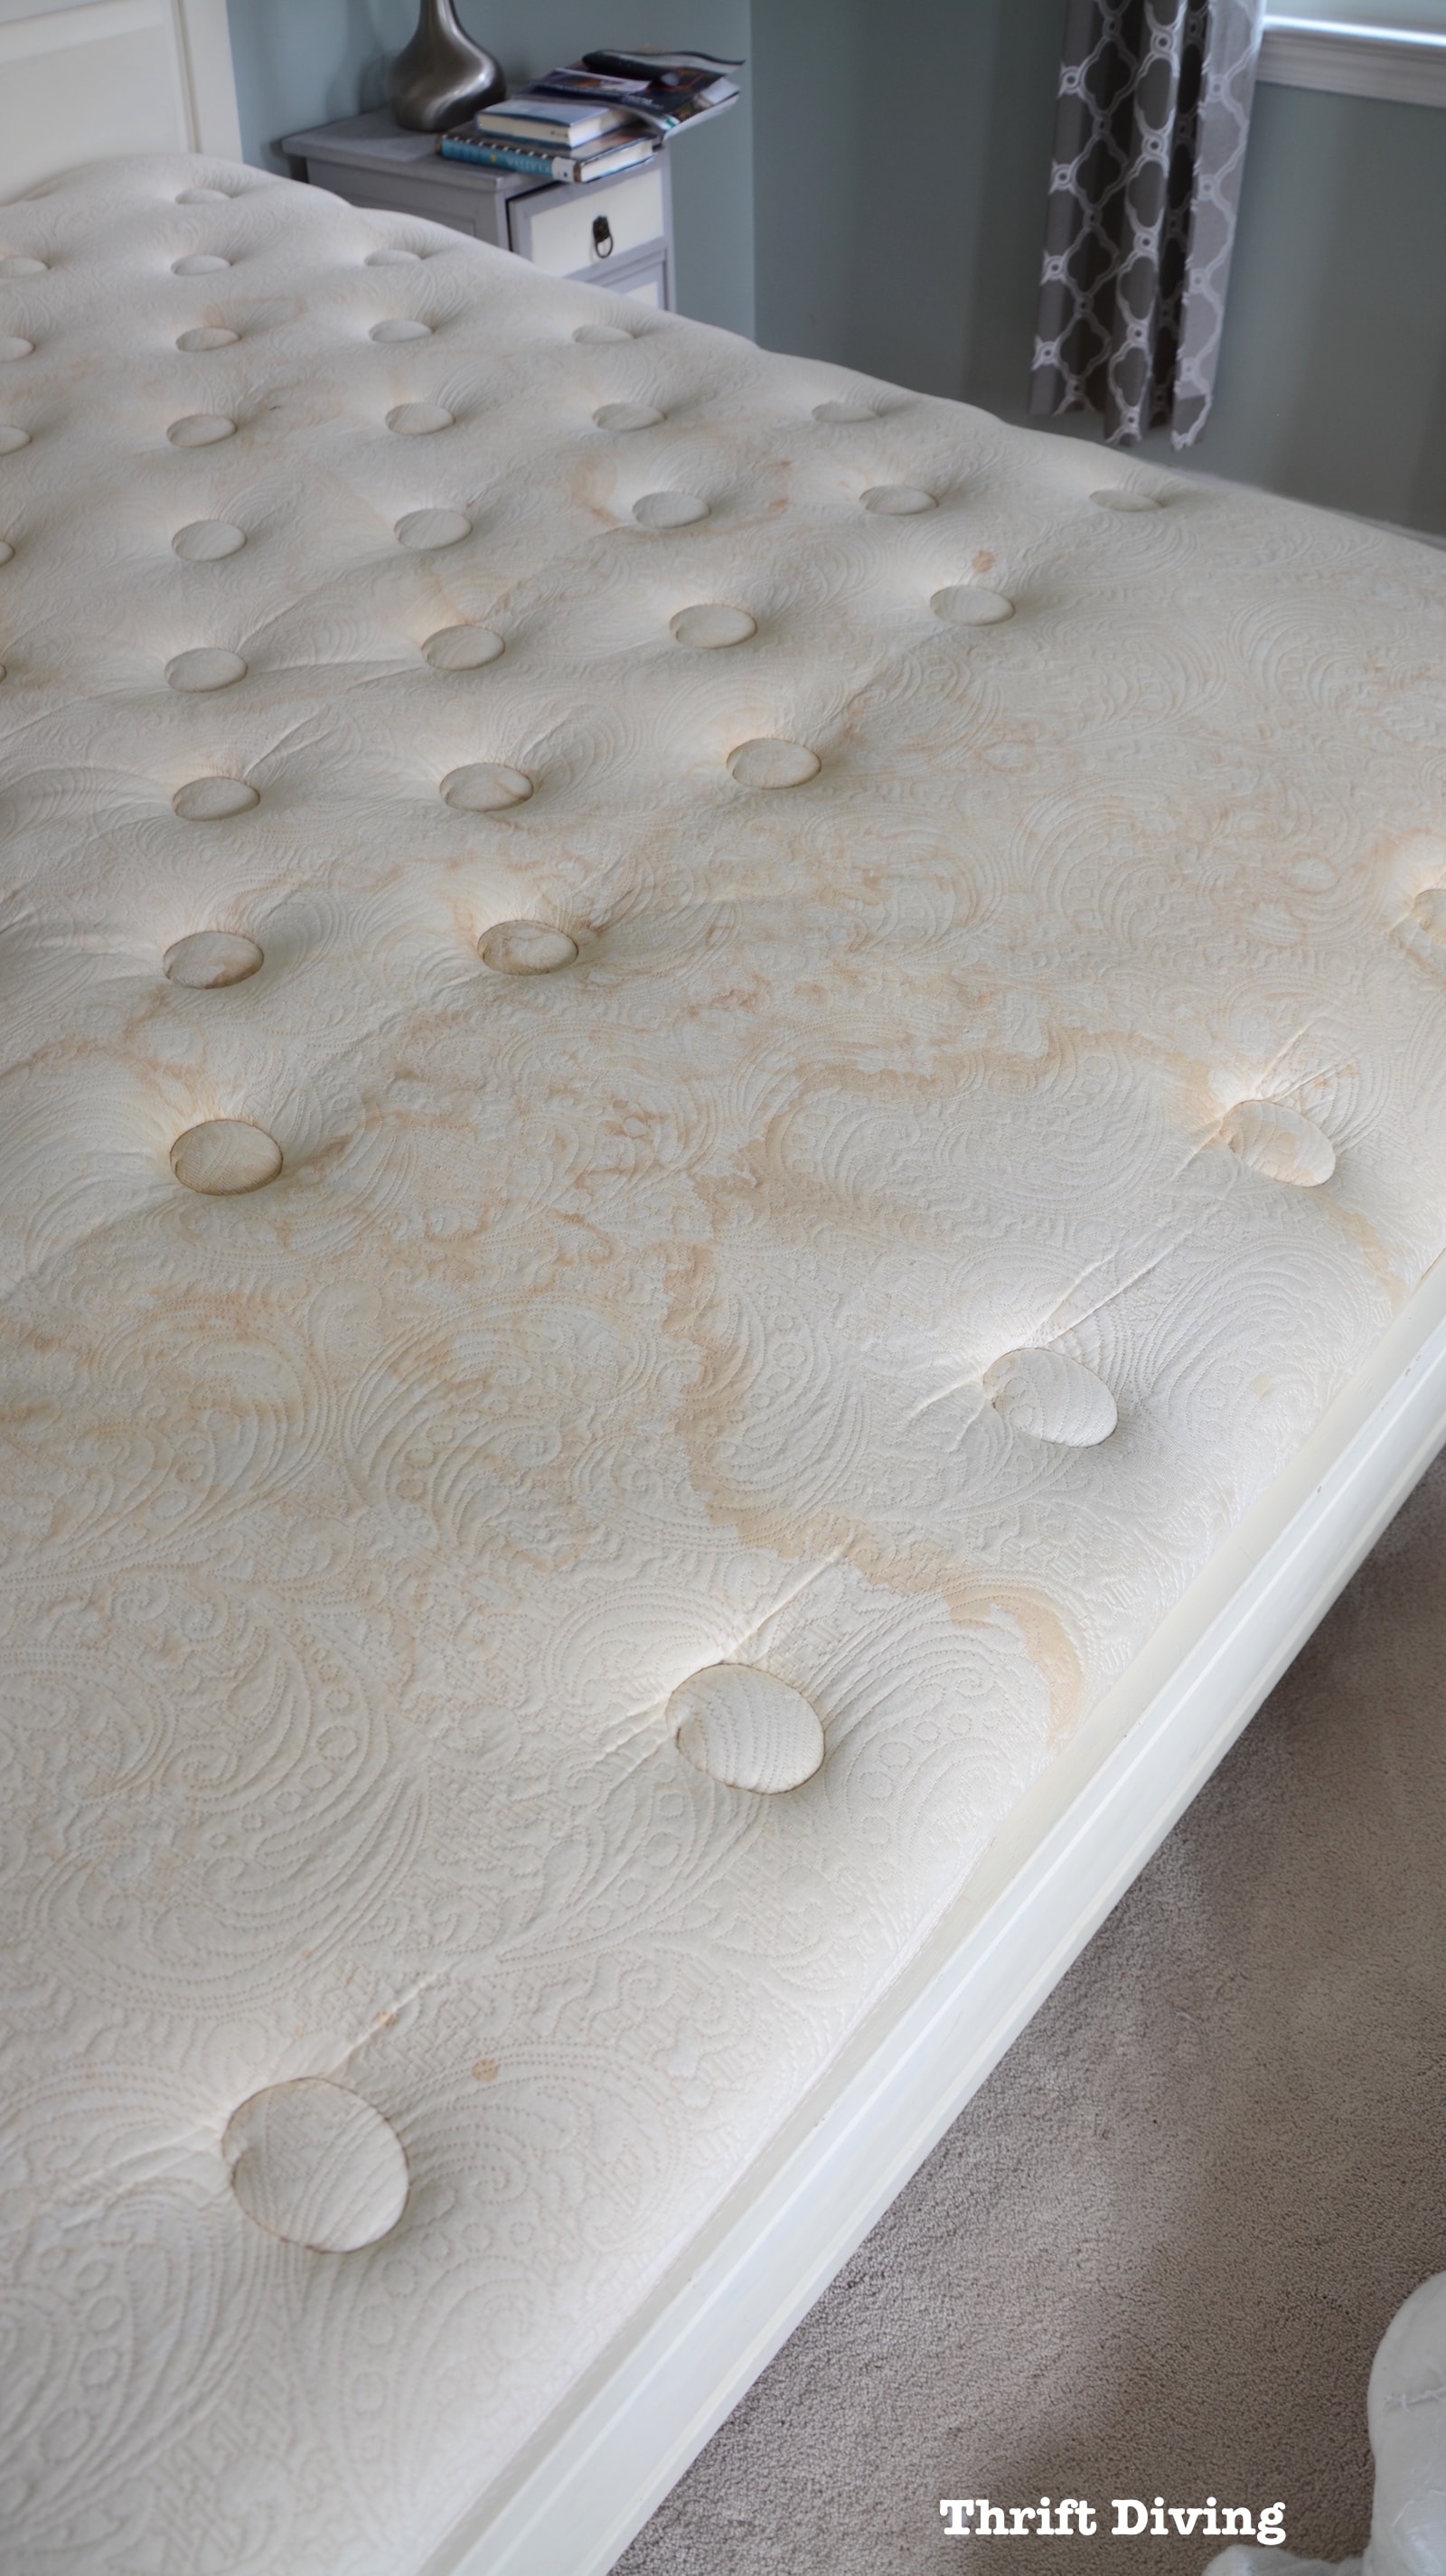 Lull Mattress Review and painted IKEA bed frame - Nasty mattress - Thrift Diving